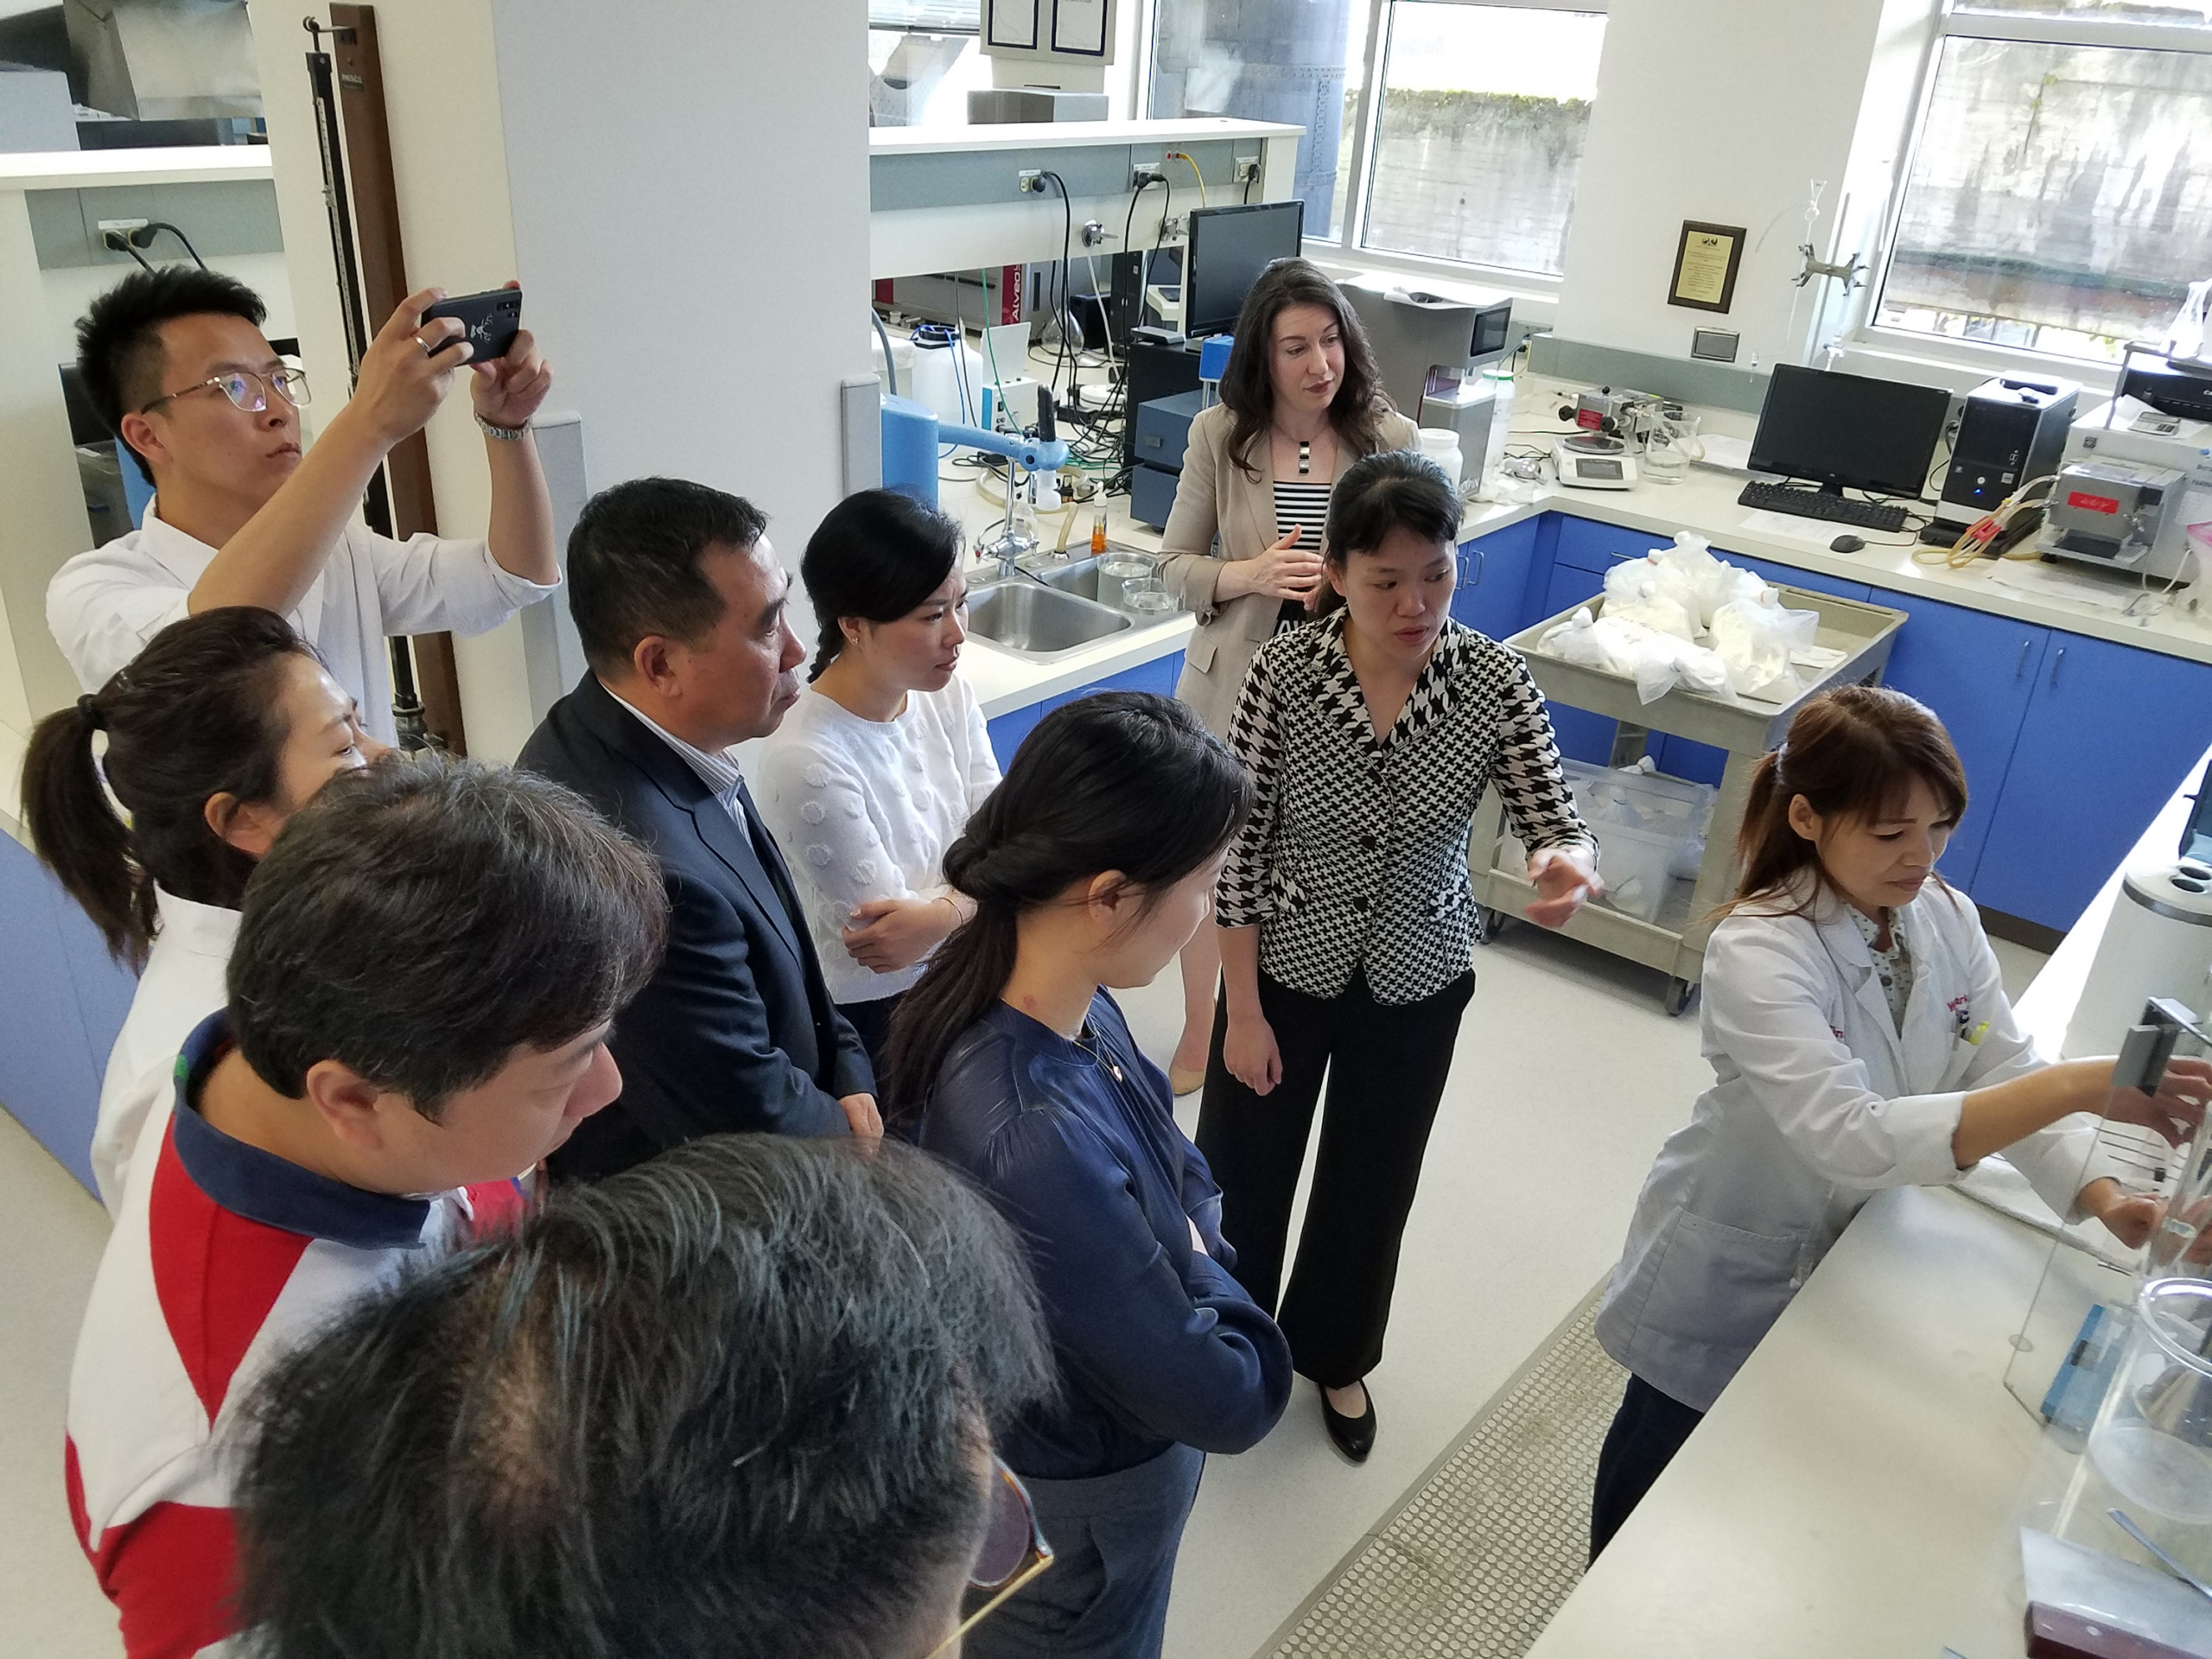 Chinese wheat buyers and flour milling managers visited the Wheat Marketing Center in Portland, Ore., in May 2019.